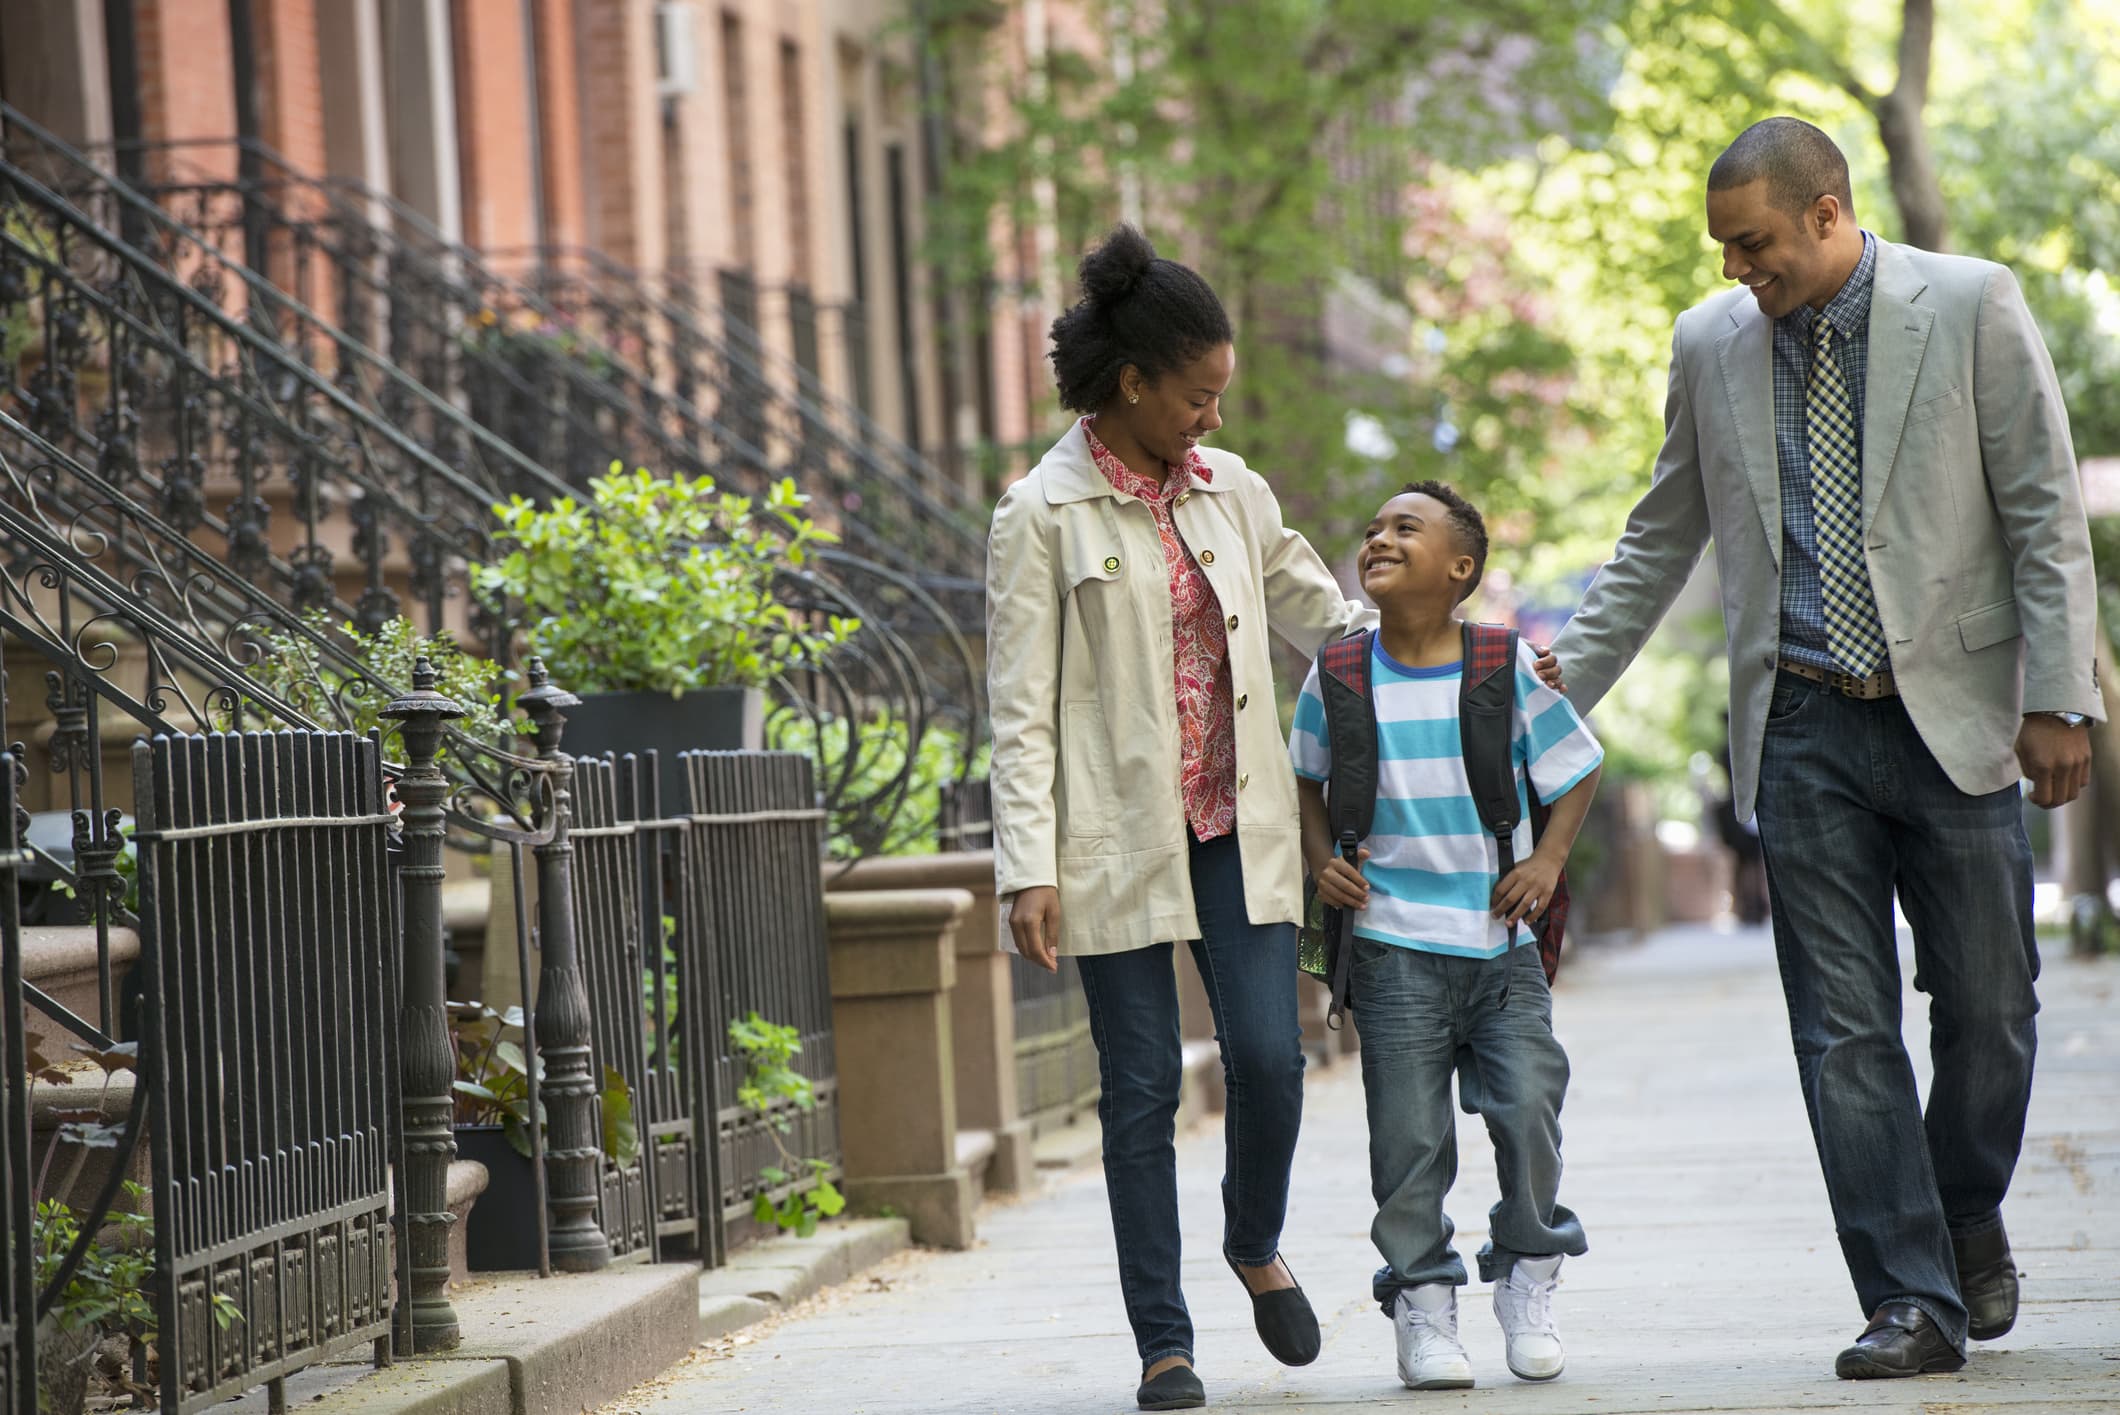 Black upward mobility strongest in diverse neighborhoods with mentorship opportunities, says Census Bureau